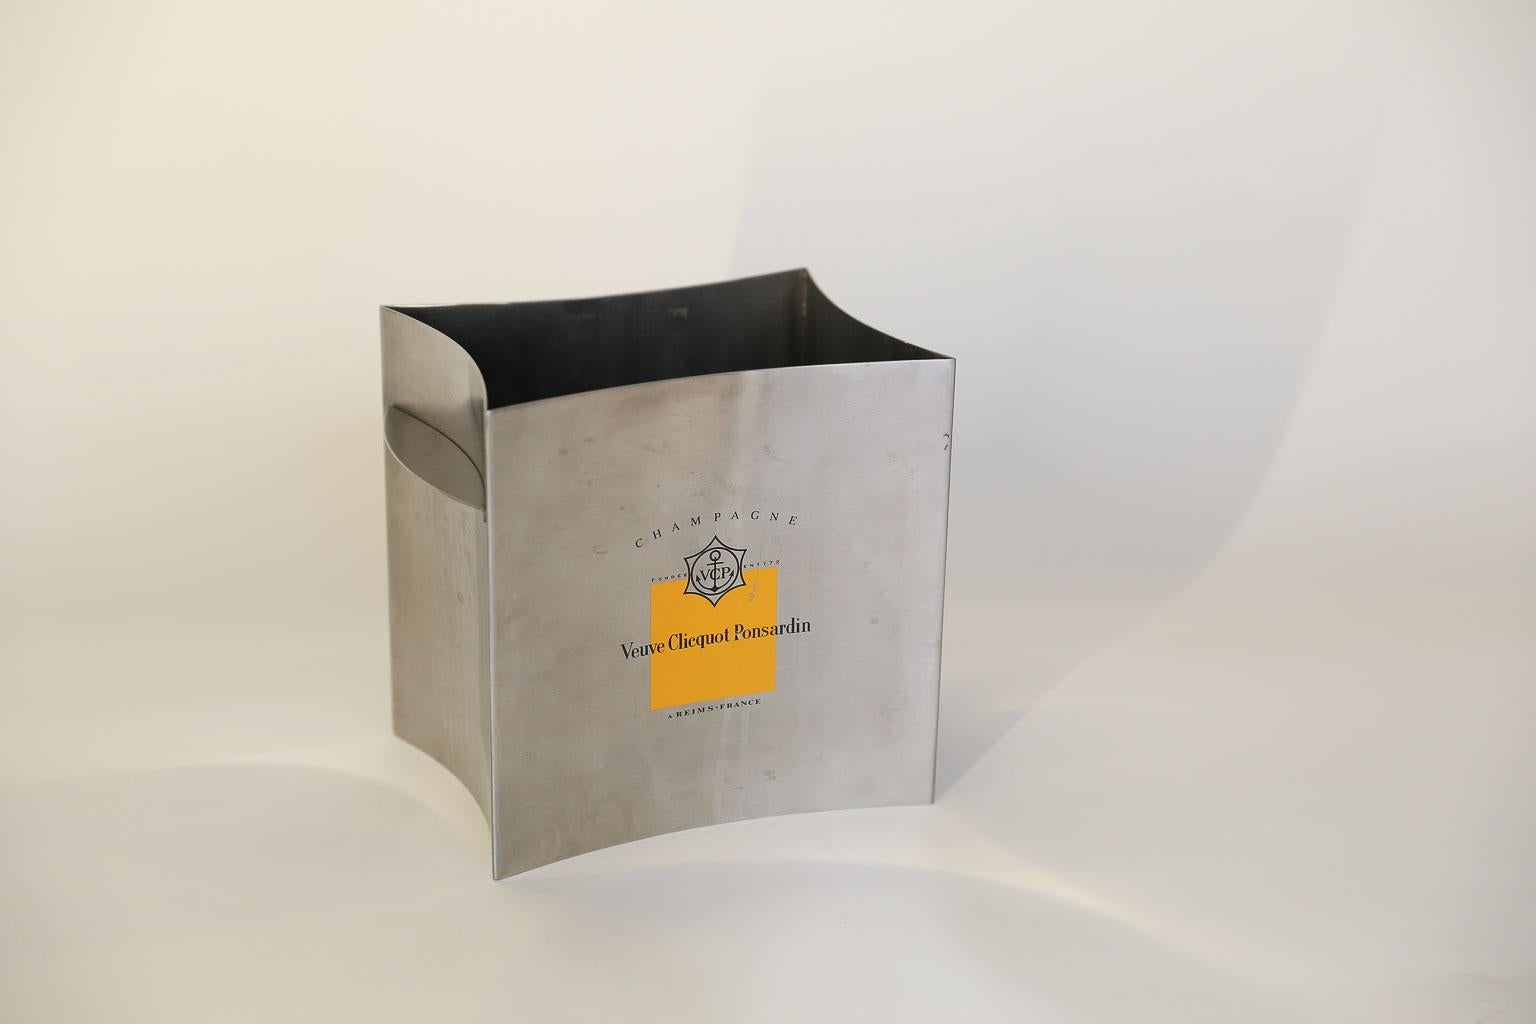 This is a beautiful stainless steel single bottle champagne cooler from the House of Veuve Clicquot bearing the name and insignia of the house. The sleek, angular look and contemporary design of the cooler are the star attractions. The cooler could